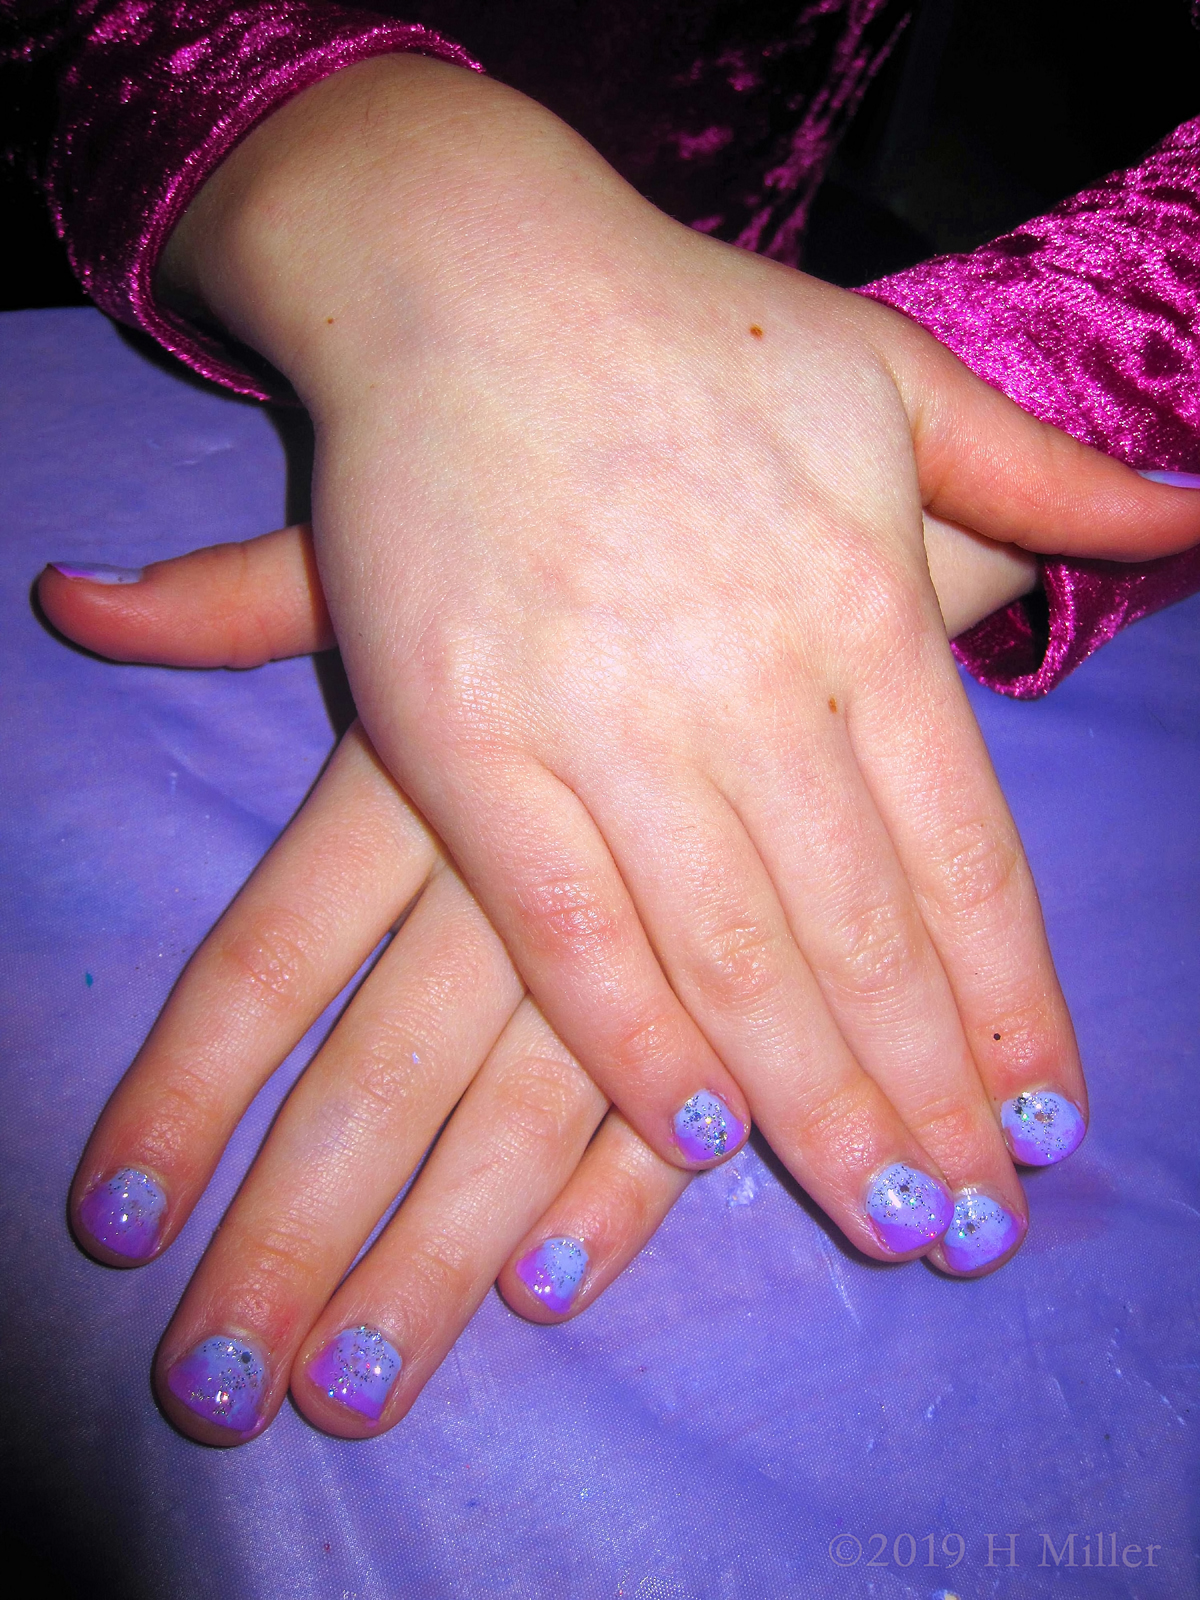 Beautiful Pastel Colored Kids Manicure With Overlay Of Sparkles 